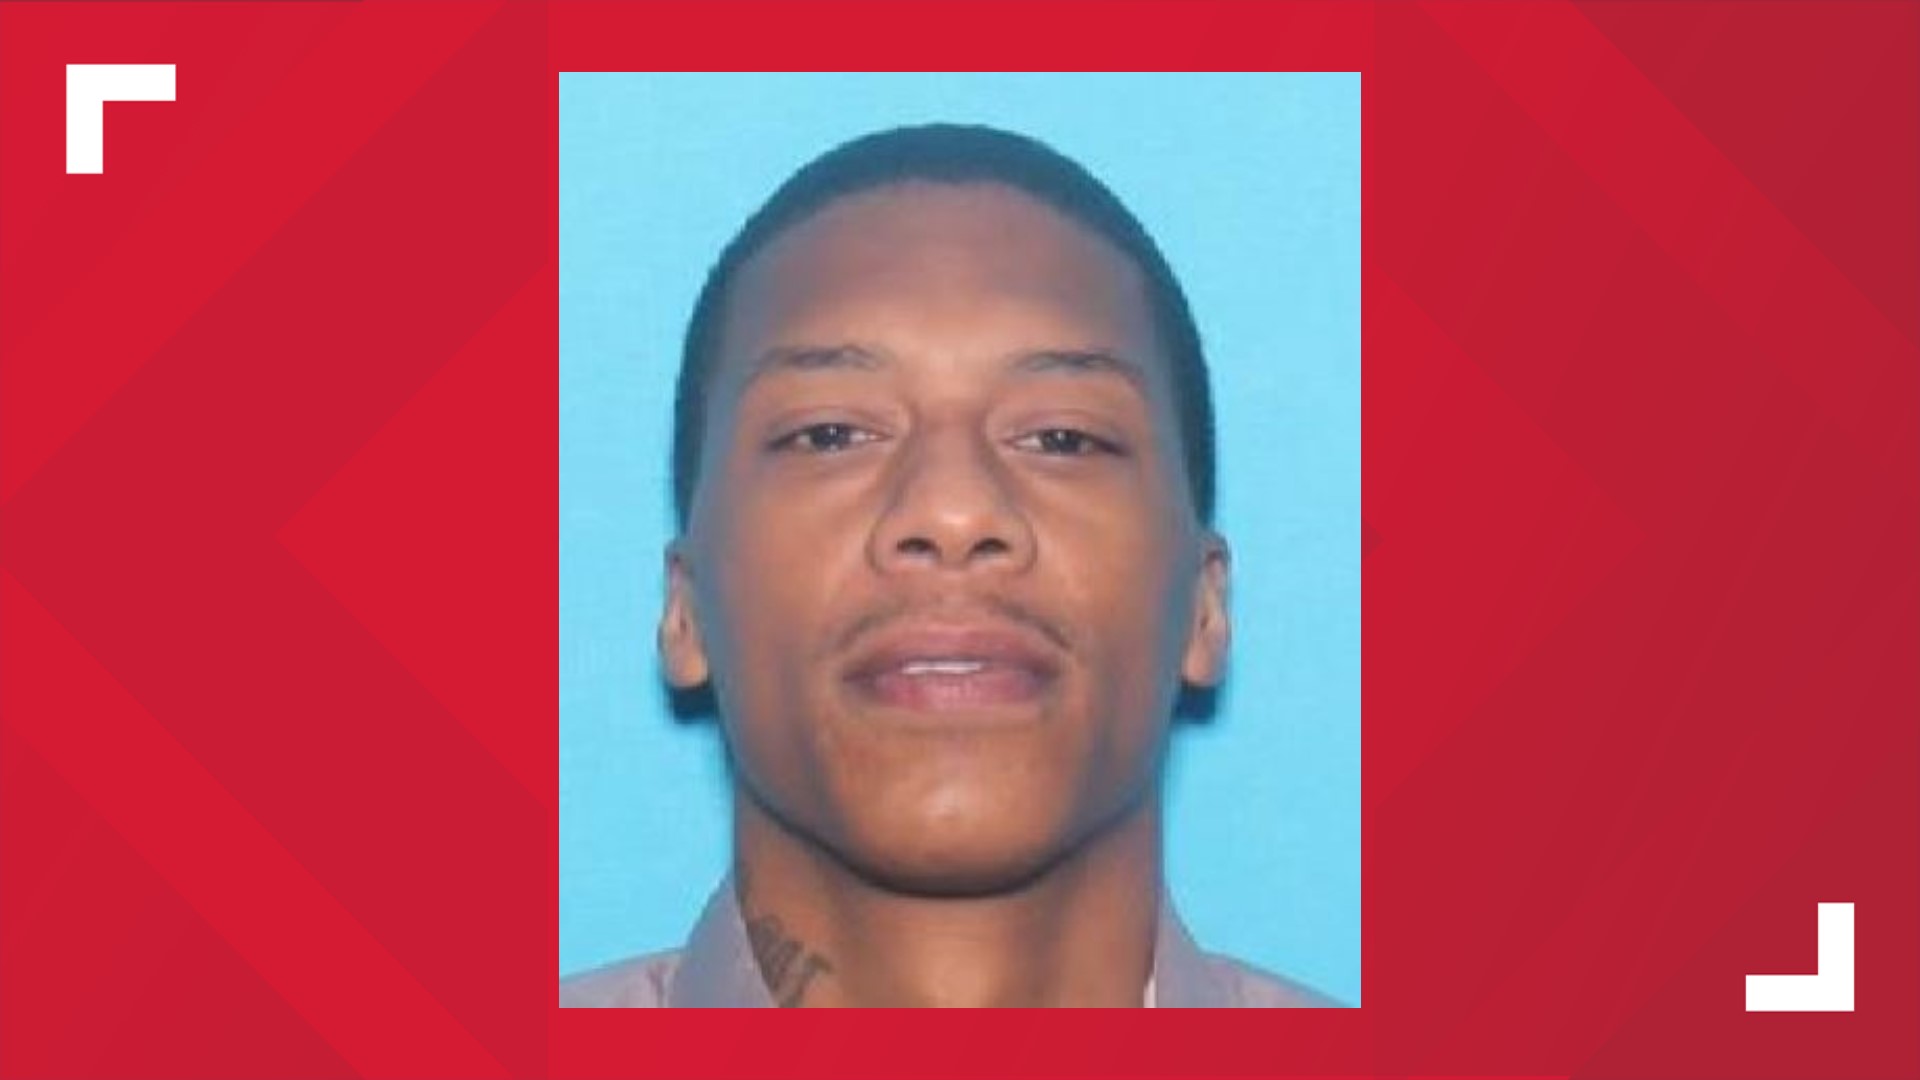 Kurt Tasker, 34, was wanted by the Harrisburg Bureau of Police on criminal homicide and lesser charges following a March 13, 2022 shooting along South 16th Street.